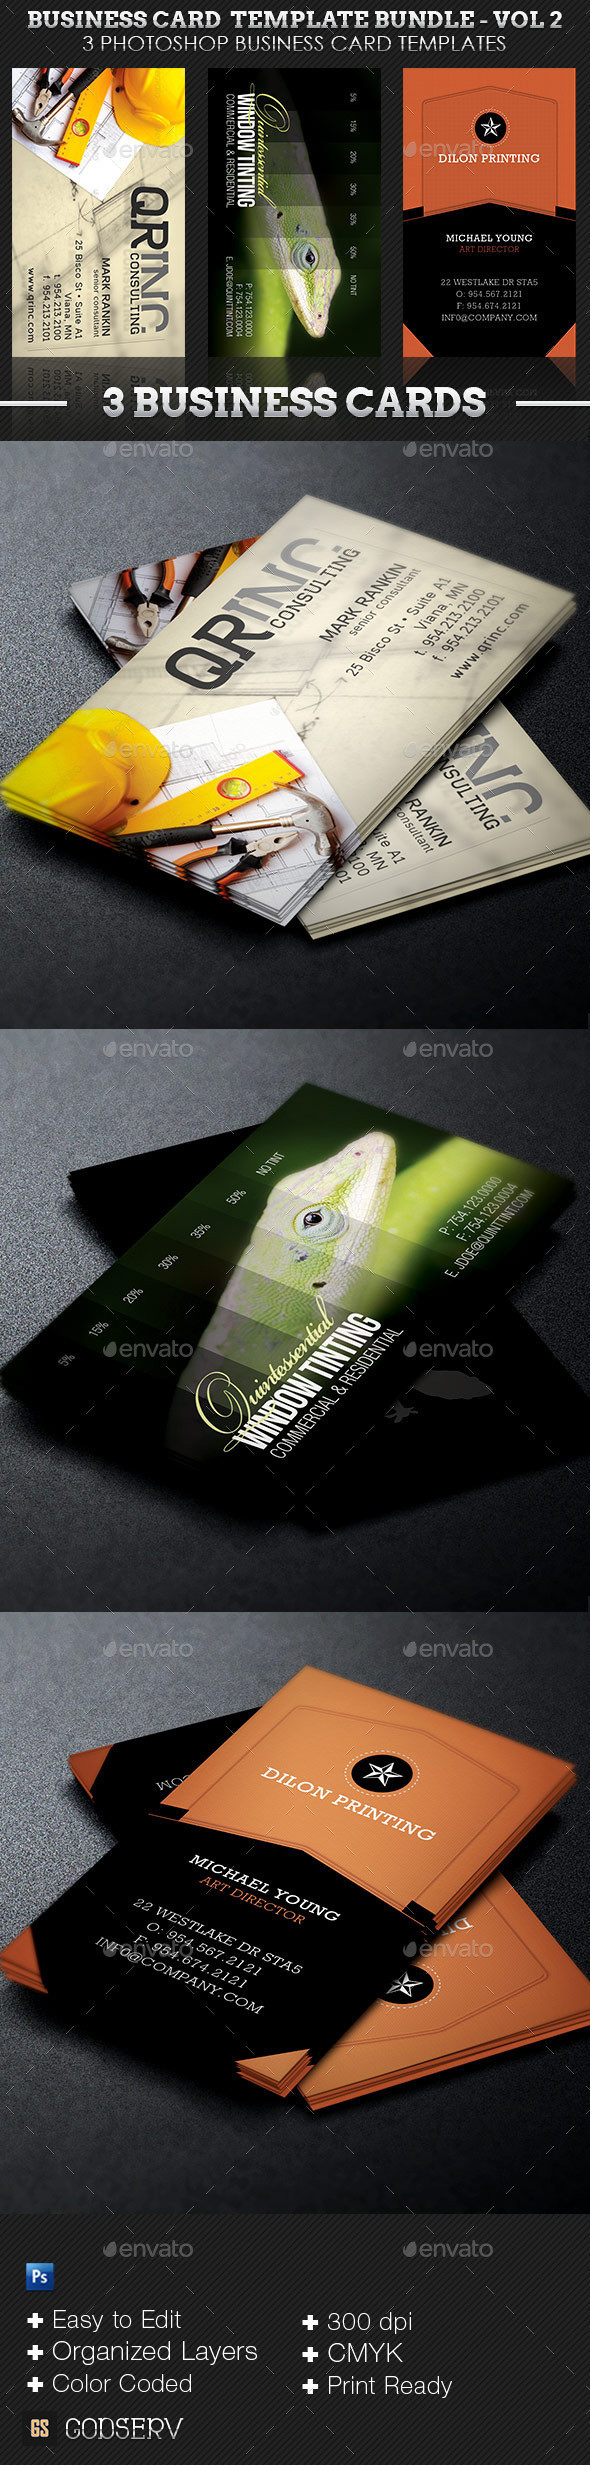 Business card bundle   volume 2 preview